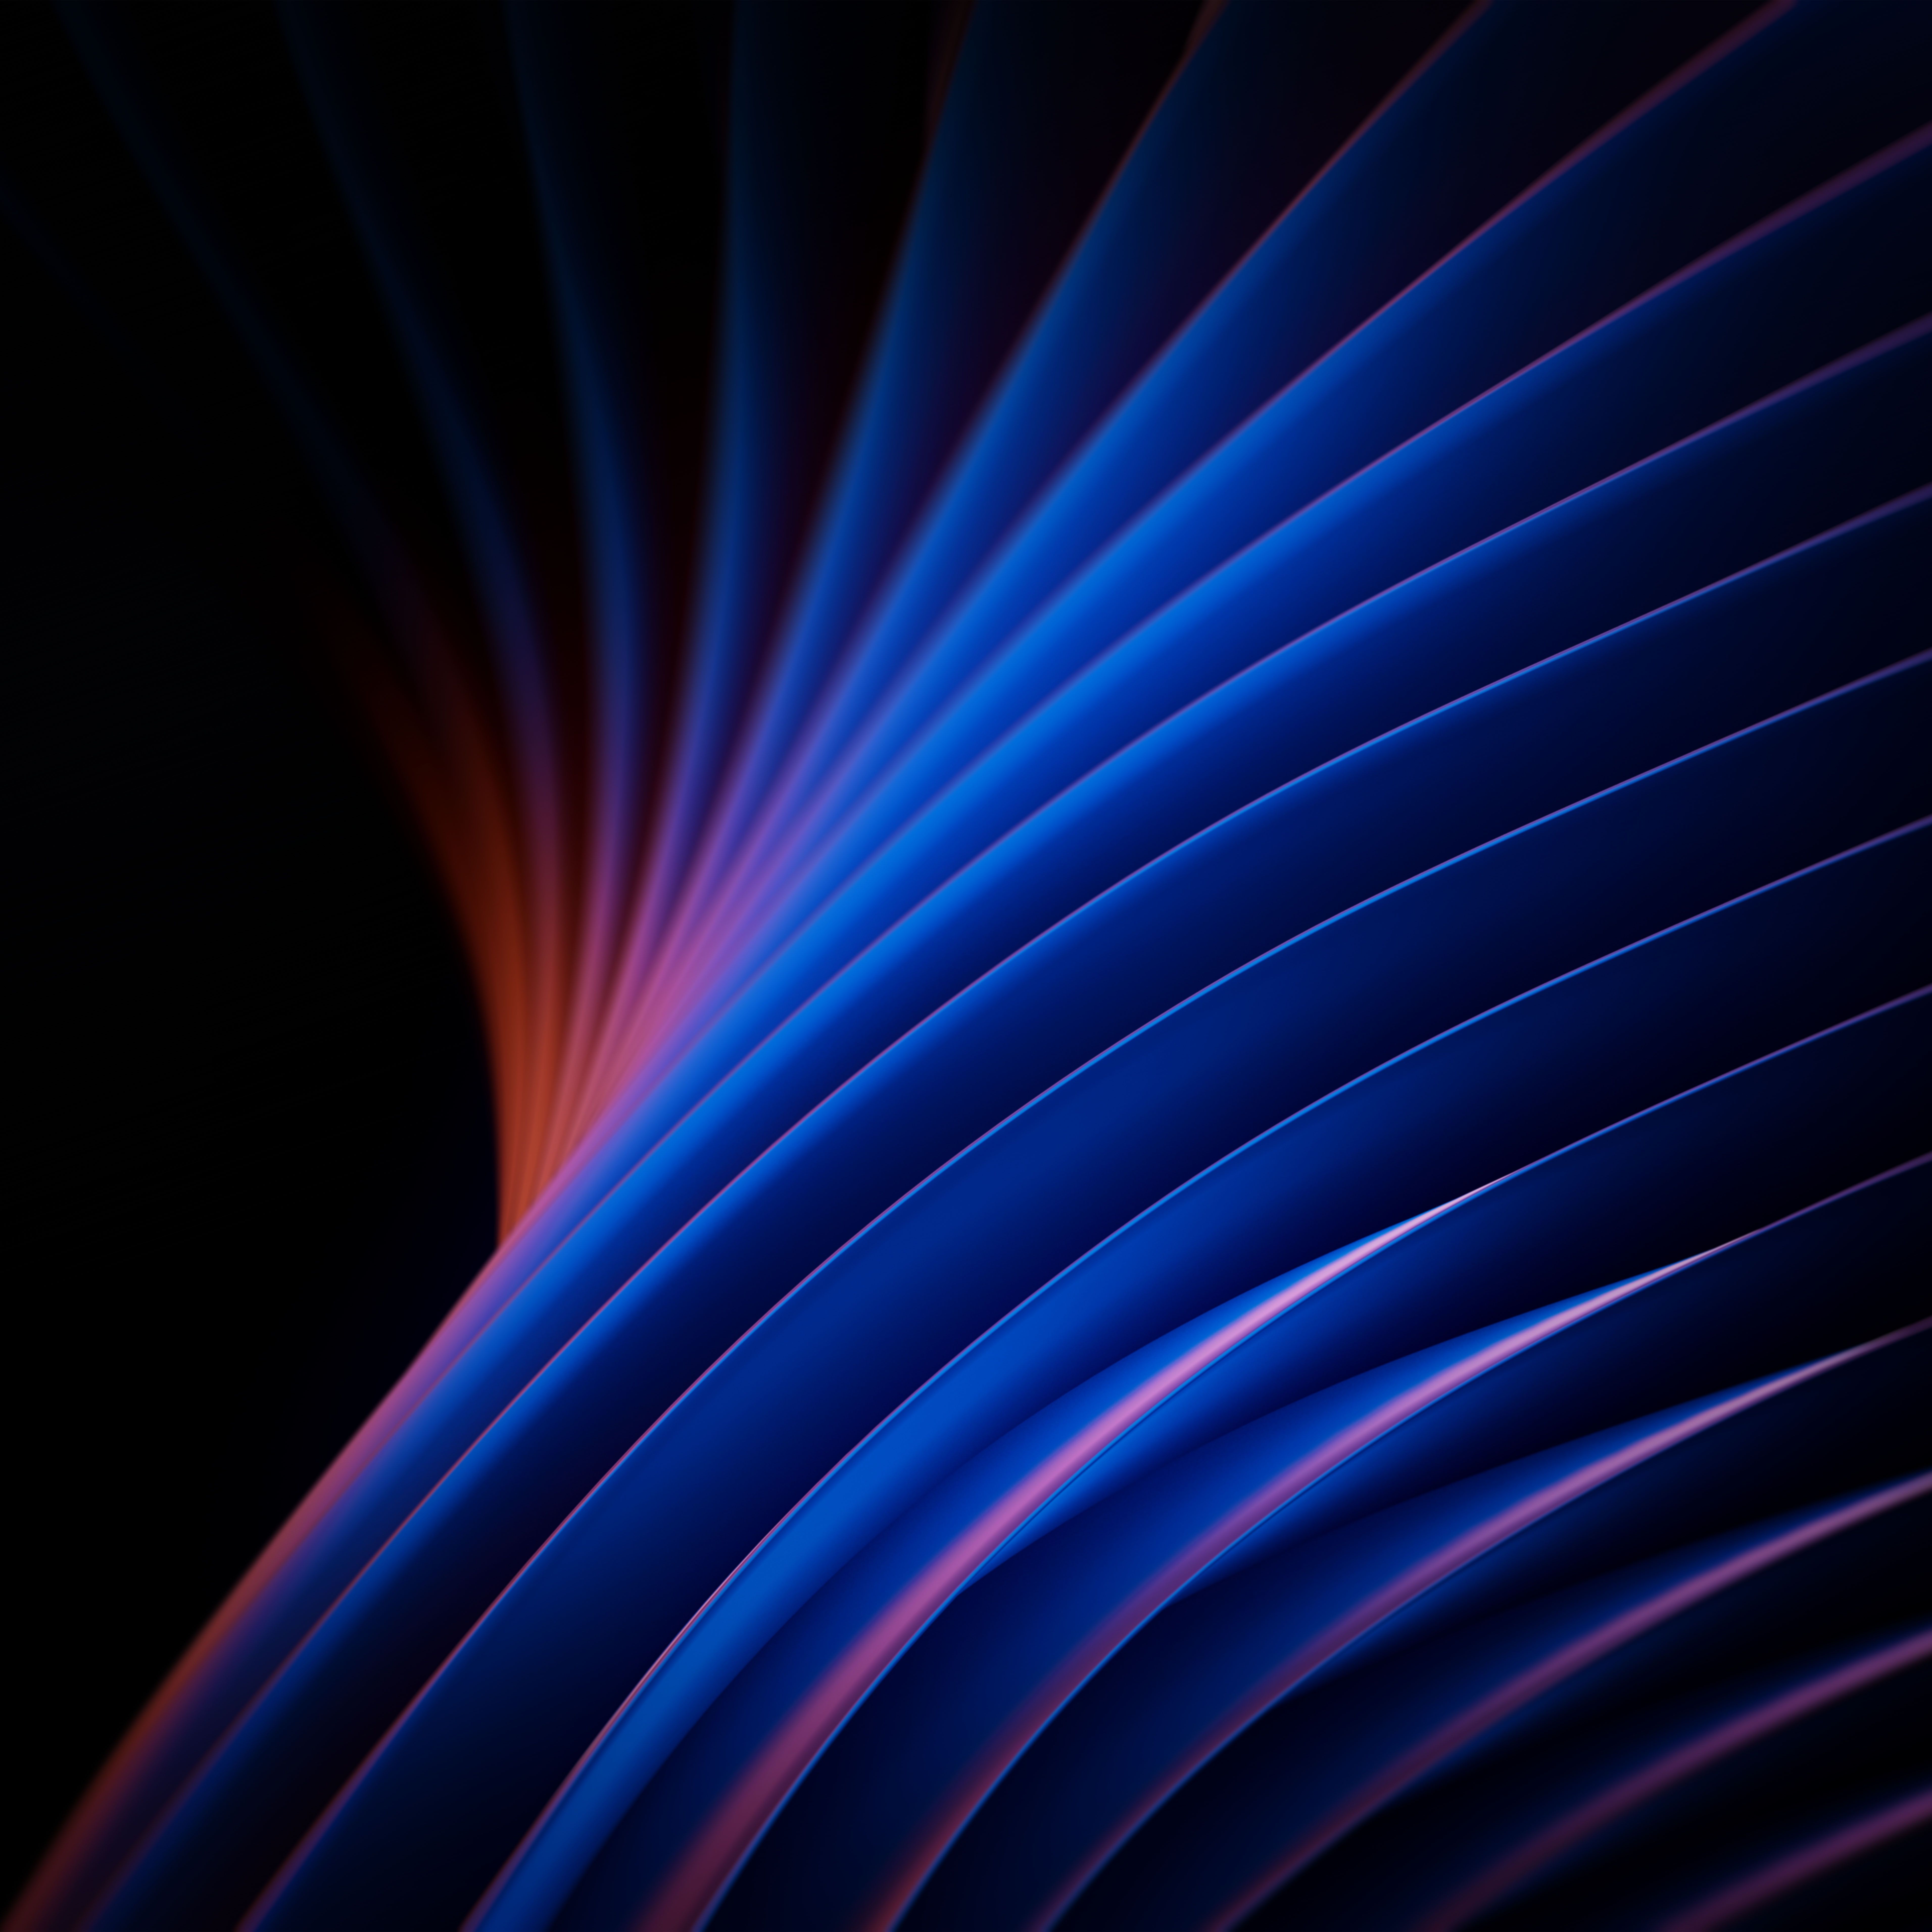 Oppo Wallpapers - Top Free Oppo Backgrounds - WallpaperAccess